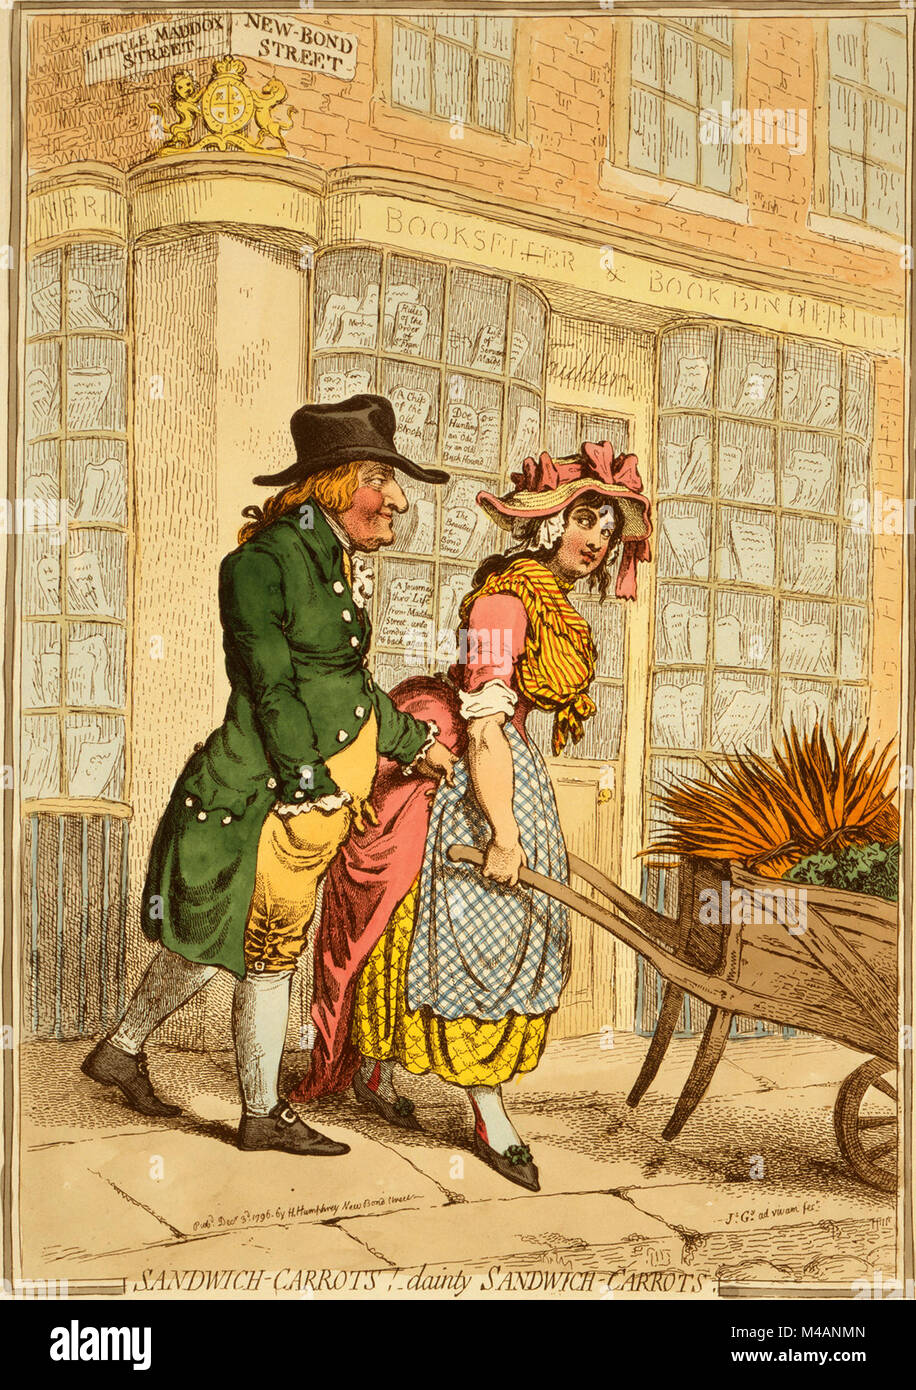 Sandwich-Carrots! - dainty Sandwich-Carrots by James Gillray published 1796.  A buxom girl pushing a wheelbarrow of carrots along Bond Street, looking over her shoulder at an older man, possibly the son of John Montagu, 4th Earl of Sandwich, who is tugging at her apron. In the background is a bookstore exhibiting the royal arms. Displayed in the window are books with the titles 'A Chip of the old Block'; 'Doe Hunting an Ode by an old Buck Hound'; 'A List of servant Maids'; 'The Beauties of Bond Street'; and 'A Journey through Life--from Maddox Street unto Conduit Street & back again'. Stock Photo